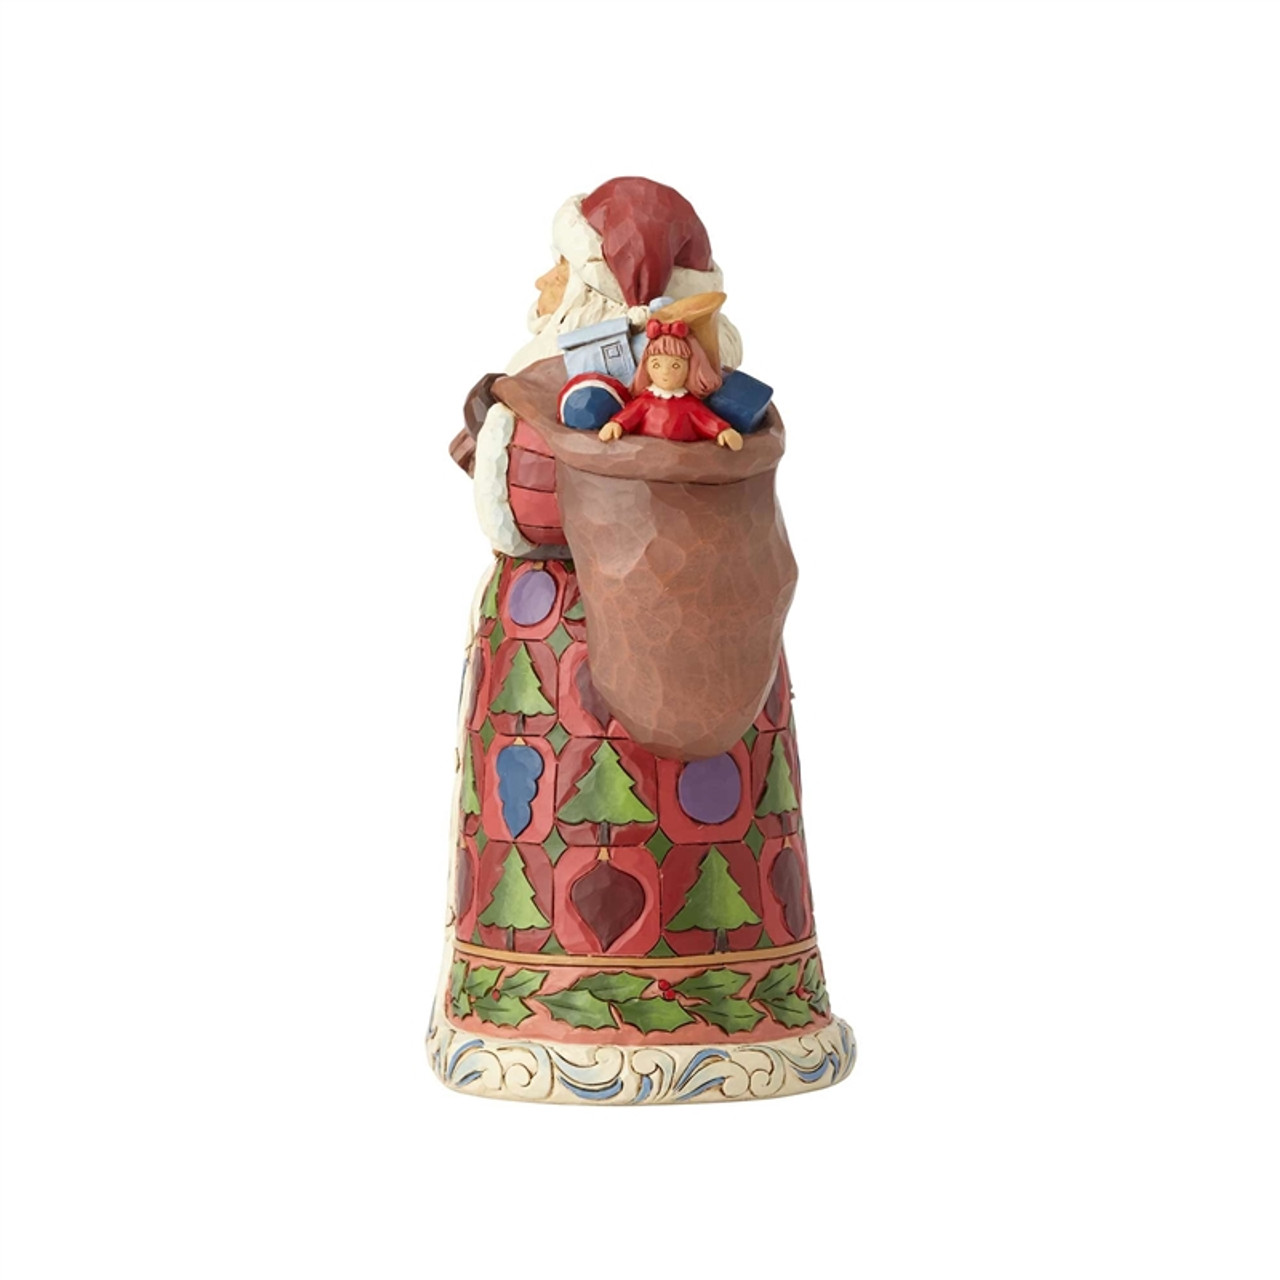 Heartwood Creek Santa with Toy Bag Figurine by Jim Shore 6001464, Flossie's  Gifts and Collectibles